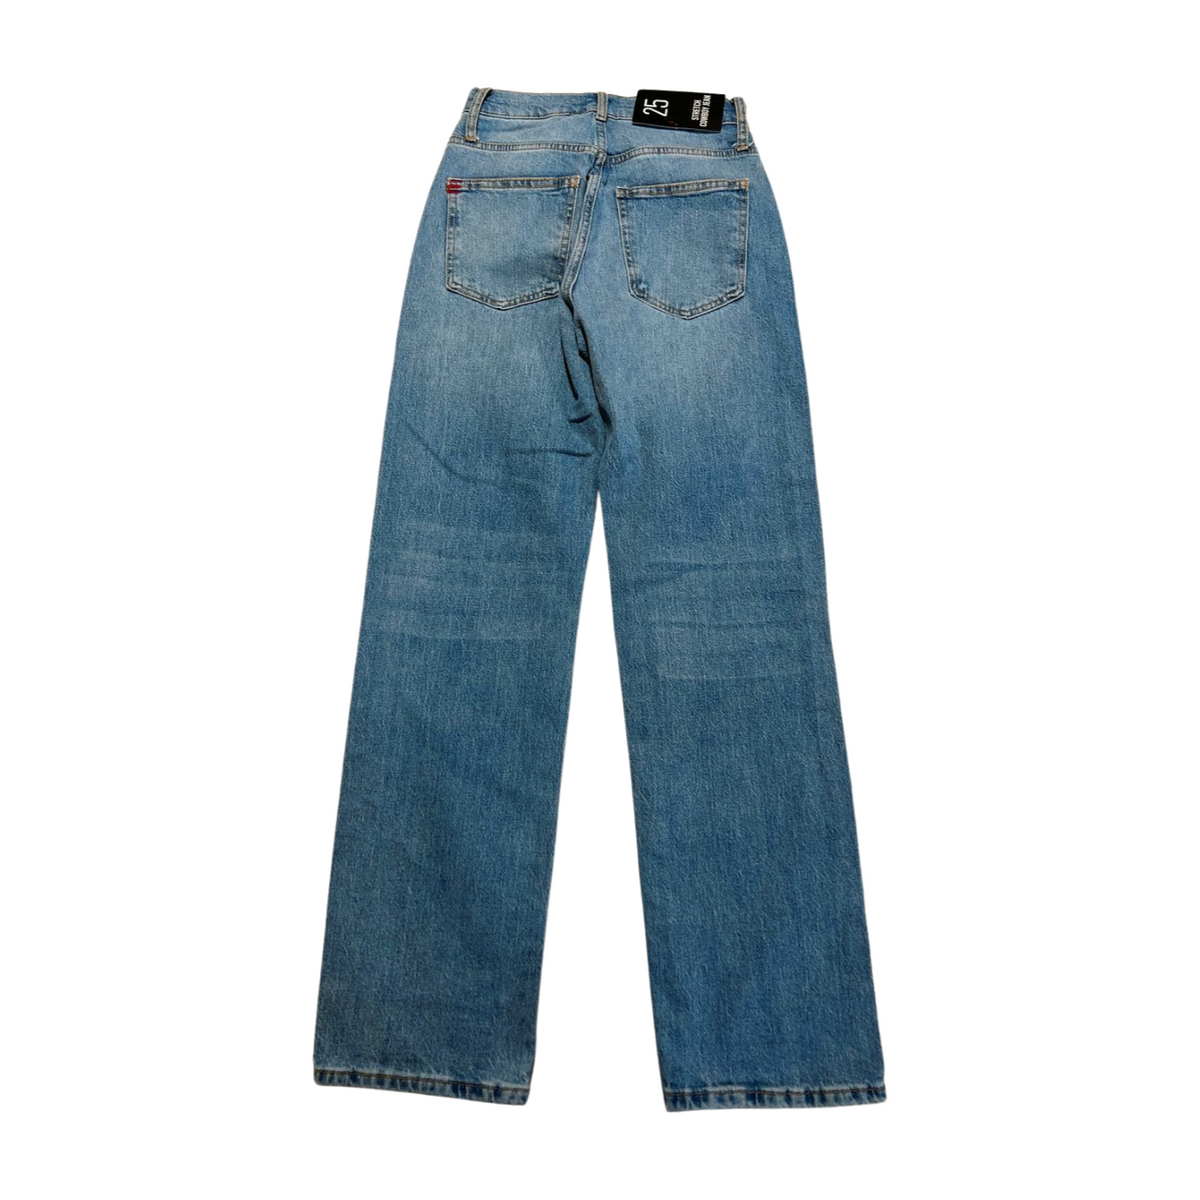 BDG- "Stretch Cowboy" Jeans NEW WITH TAGS!